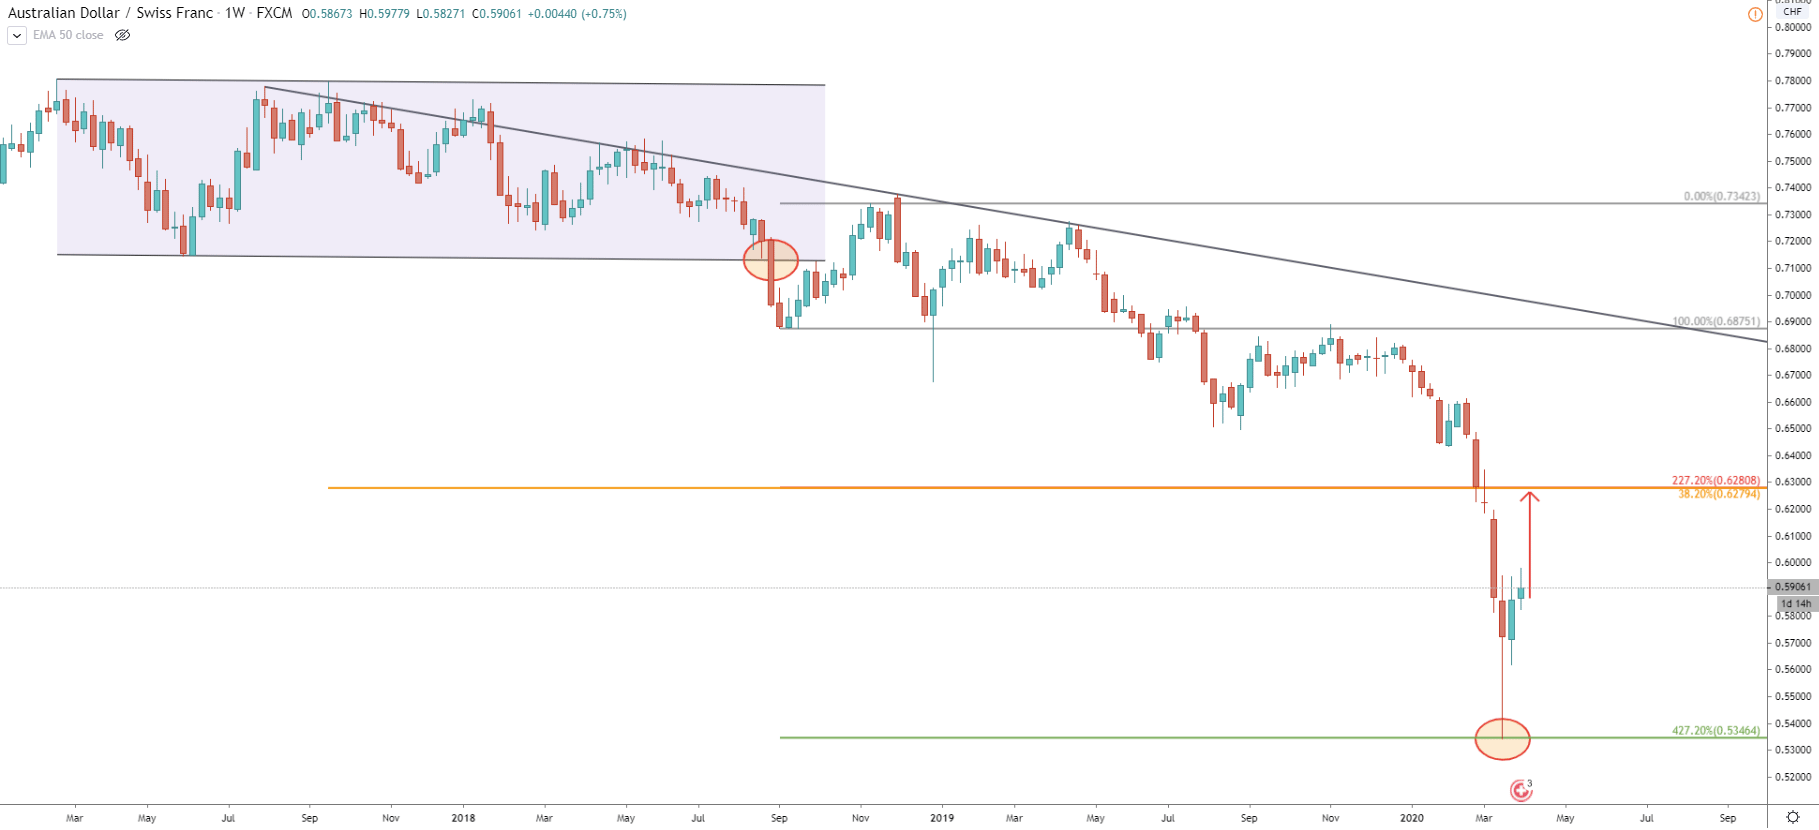 AUD/CHF Weekly Technical Analysis 1 Apr 2020